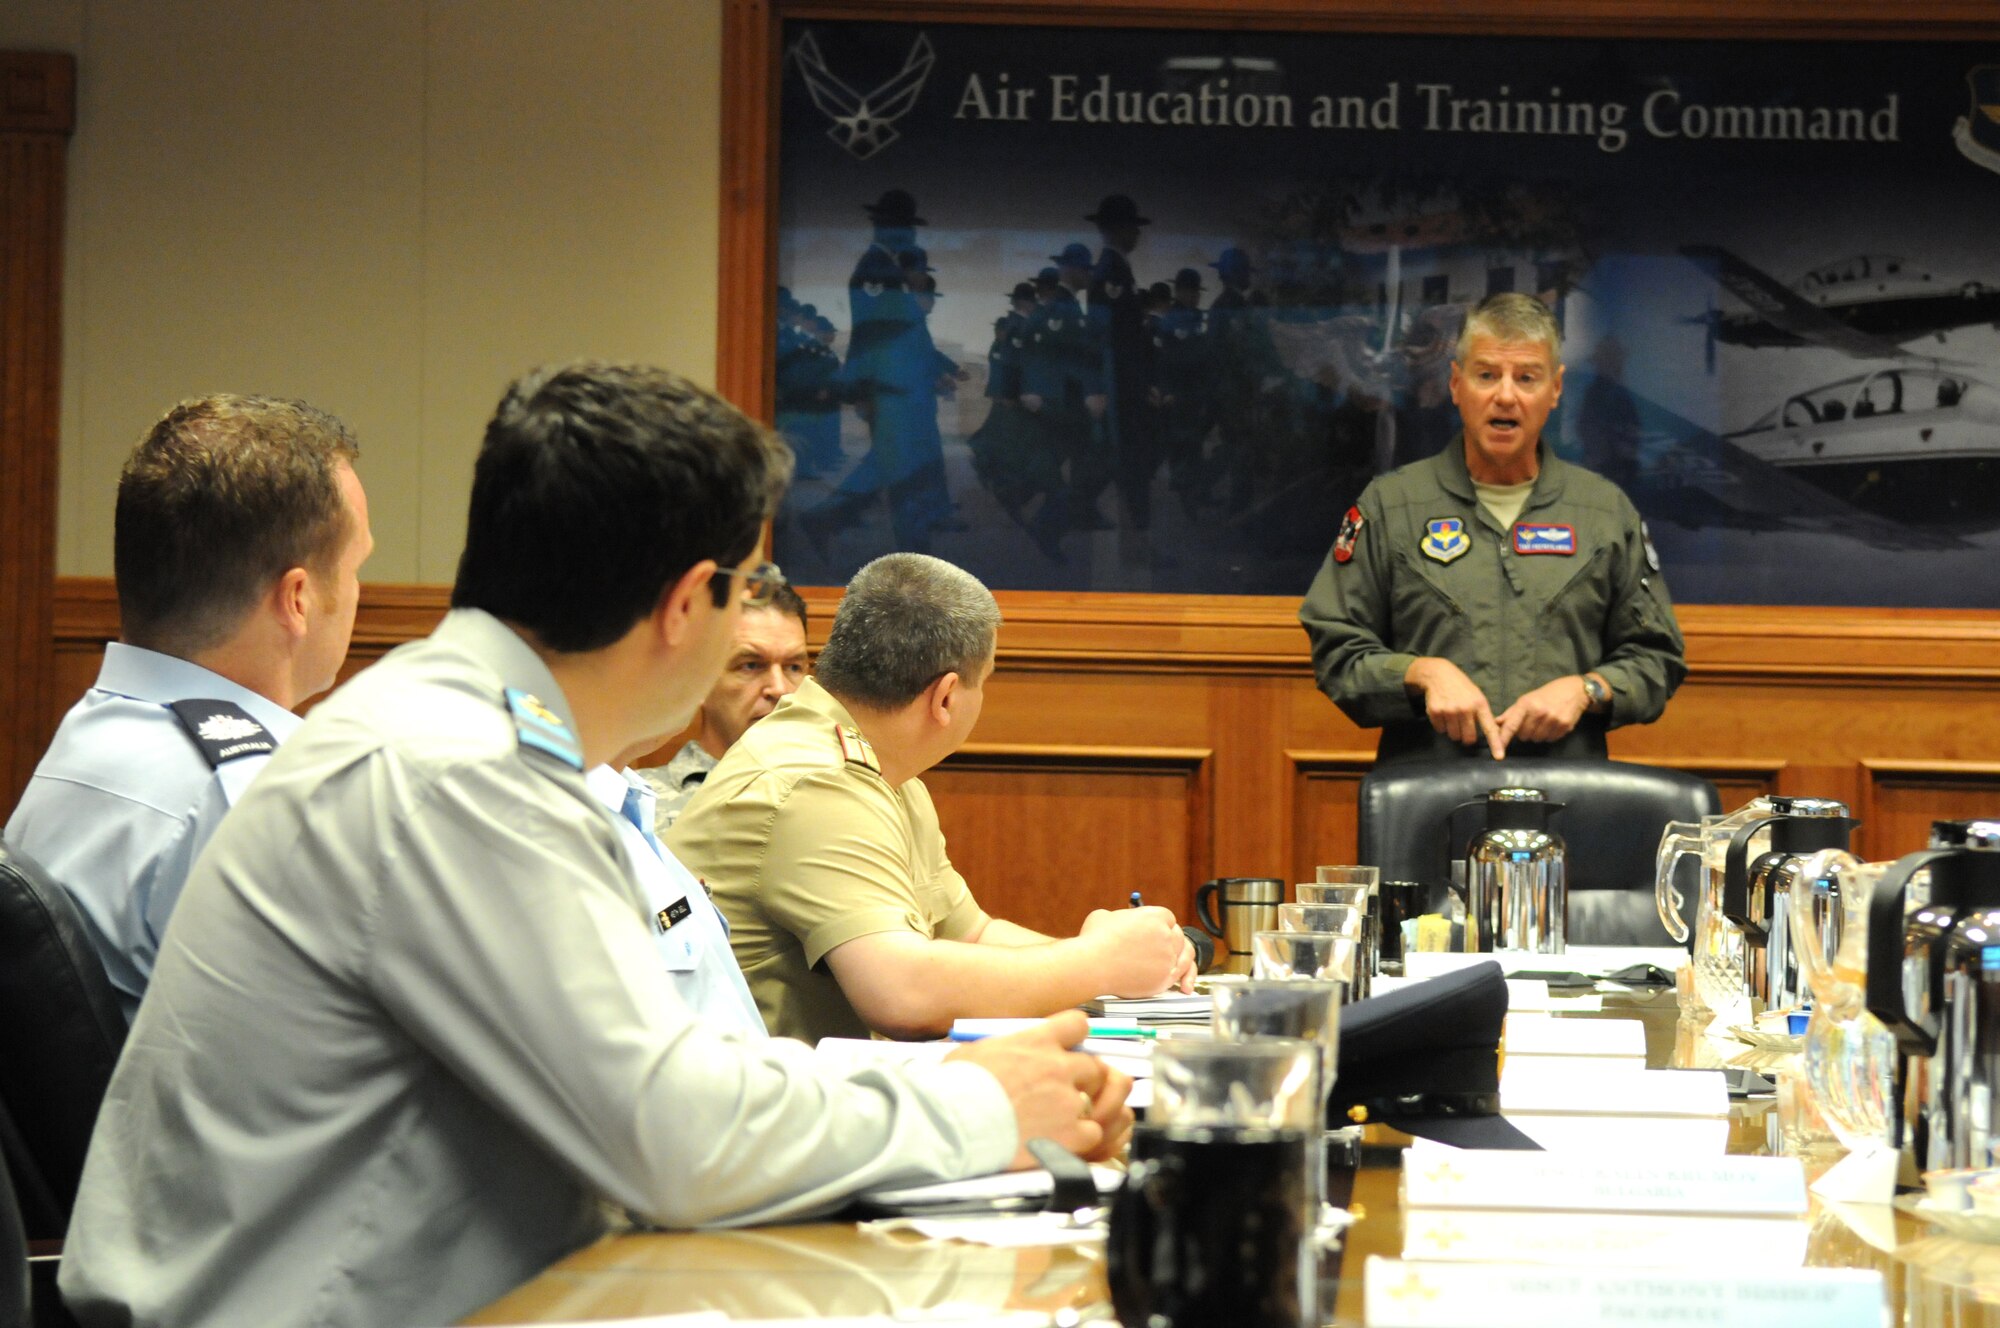 Maj. Gen. Anthony Przybyslawski, Air Education and Training Command vice commander, talks with senior enlisted leaders from partner nations during the 2009 Worldwide Senior Enlisted Leaders Summit May 12-15 at Randolph Air Force Base, Texas. The visit was hosted by U.S. Air Force senior enlisted leaders to give their foreign counterparts a look at a U.S. Air Force enlisted member's career from start to finish. (U.S. Air Force photo/Rich McFadden)